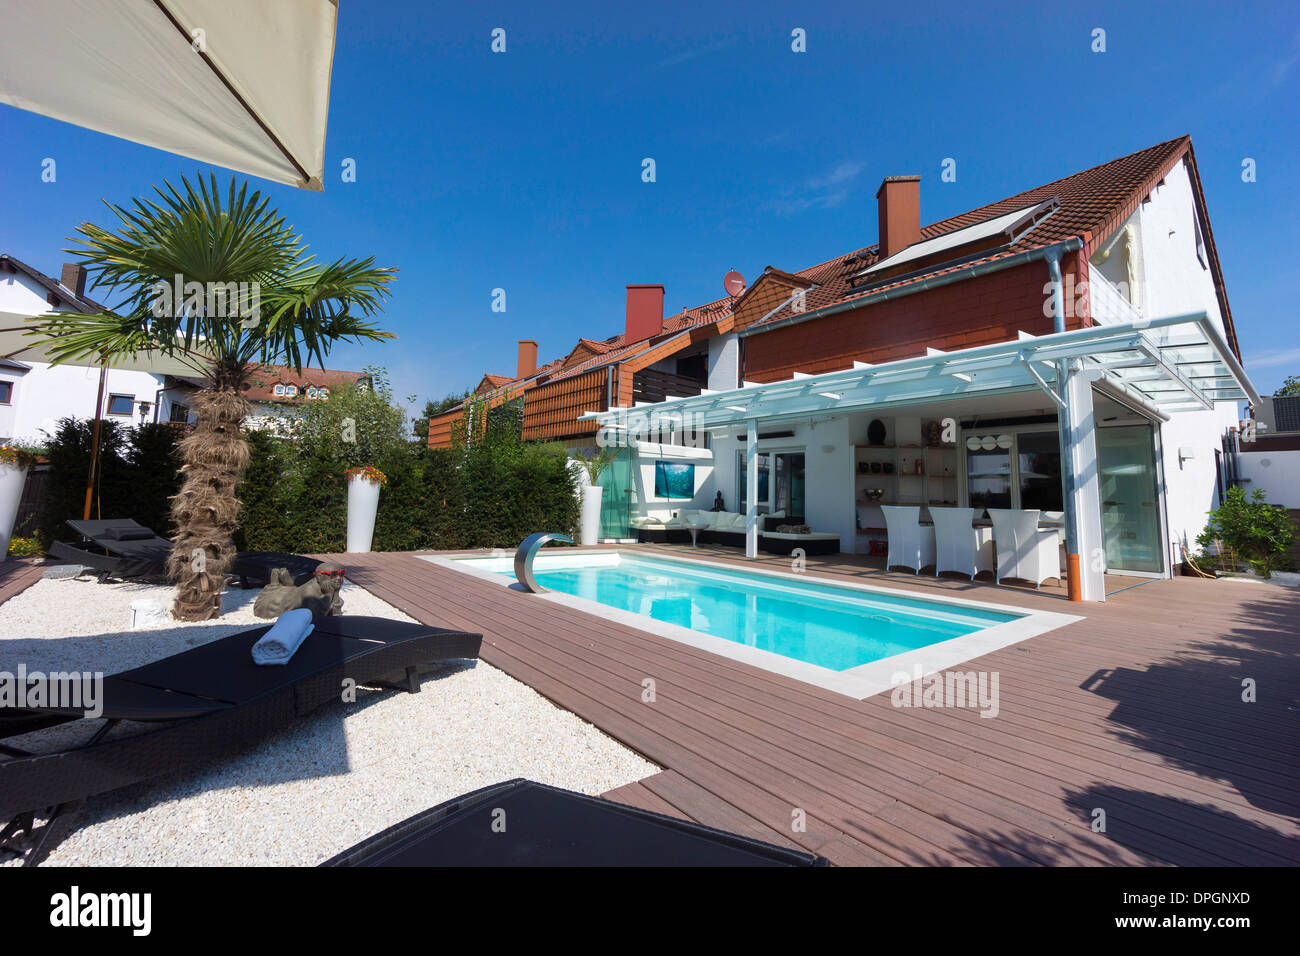 Private terraced house with garden, winter garden, pool and terrace, Germany, Europe - August 2013 Stock Photo